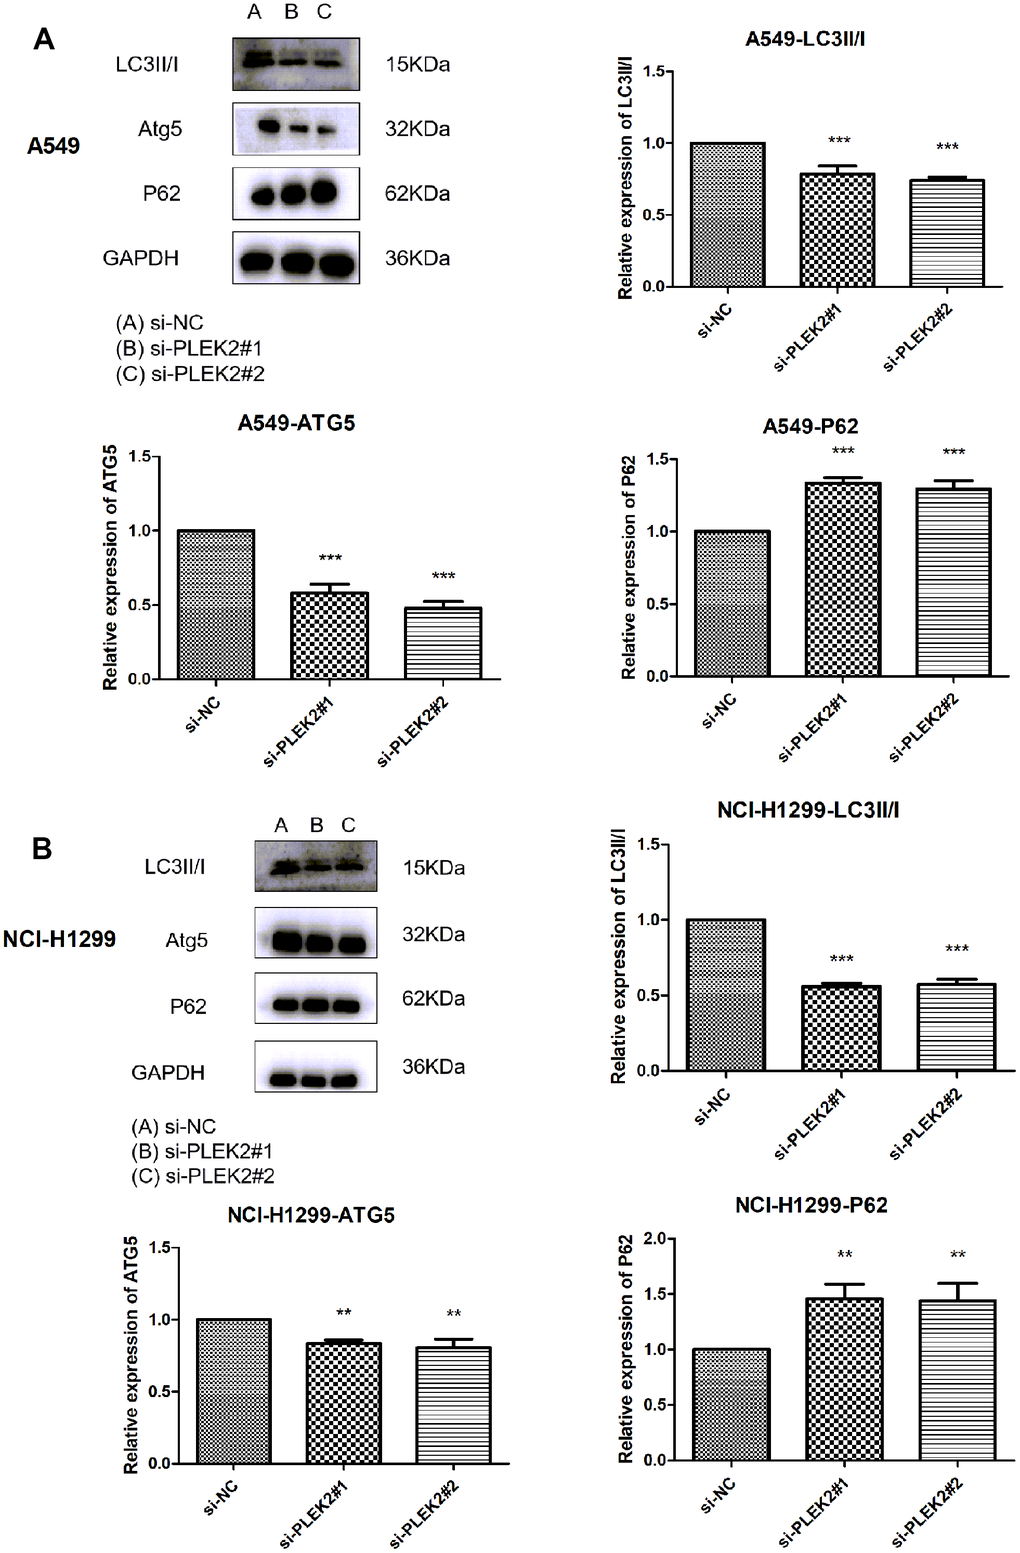 Silencing of PLEK2 prohibits the autophagy of LUAD cells. (A) The protein levels of LC3II/I, ATG5 and P62 in A549 cells after transfection of si-PLEK2#1, si-PLEK2#2 or si-NC were determined by western blotting (P B) The protein levels of LC3II/I, ATG5 and P62 in NCI-H1299 cells after transfection of si-PLEK2#1, si-PLEK2#2 or si-NC were determined by western blotting (P 